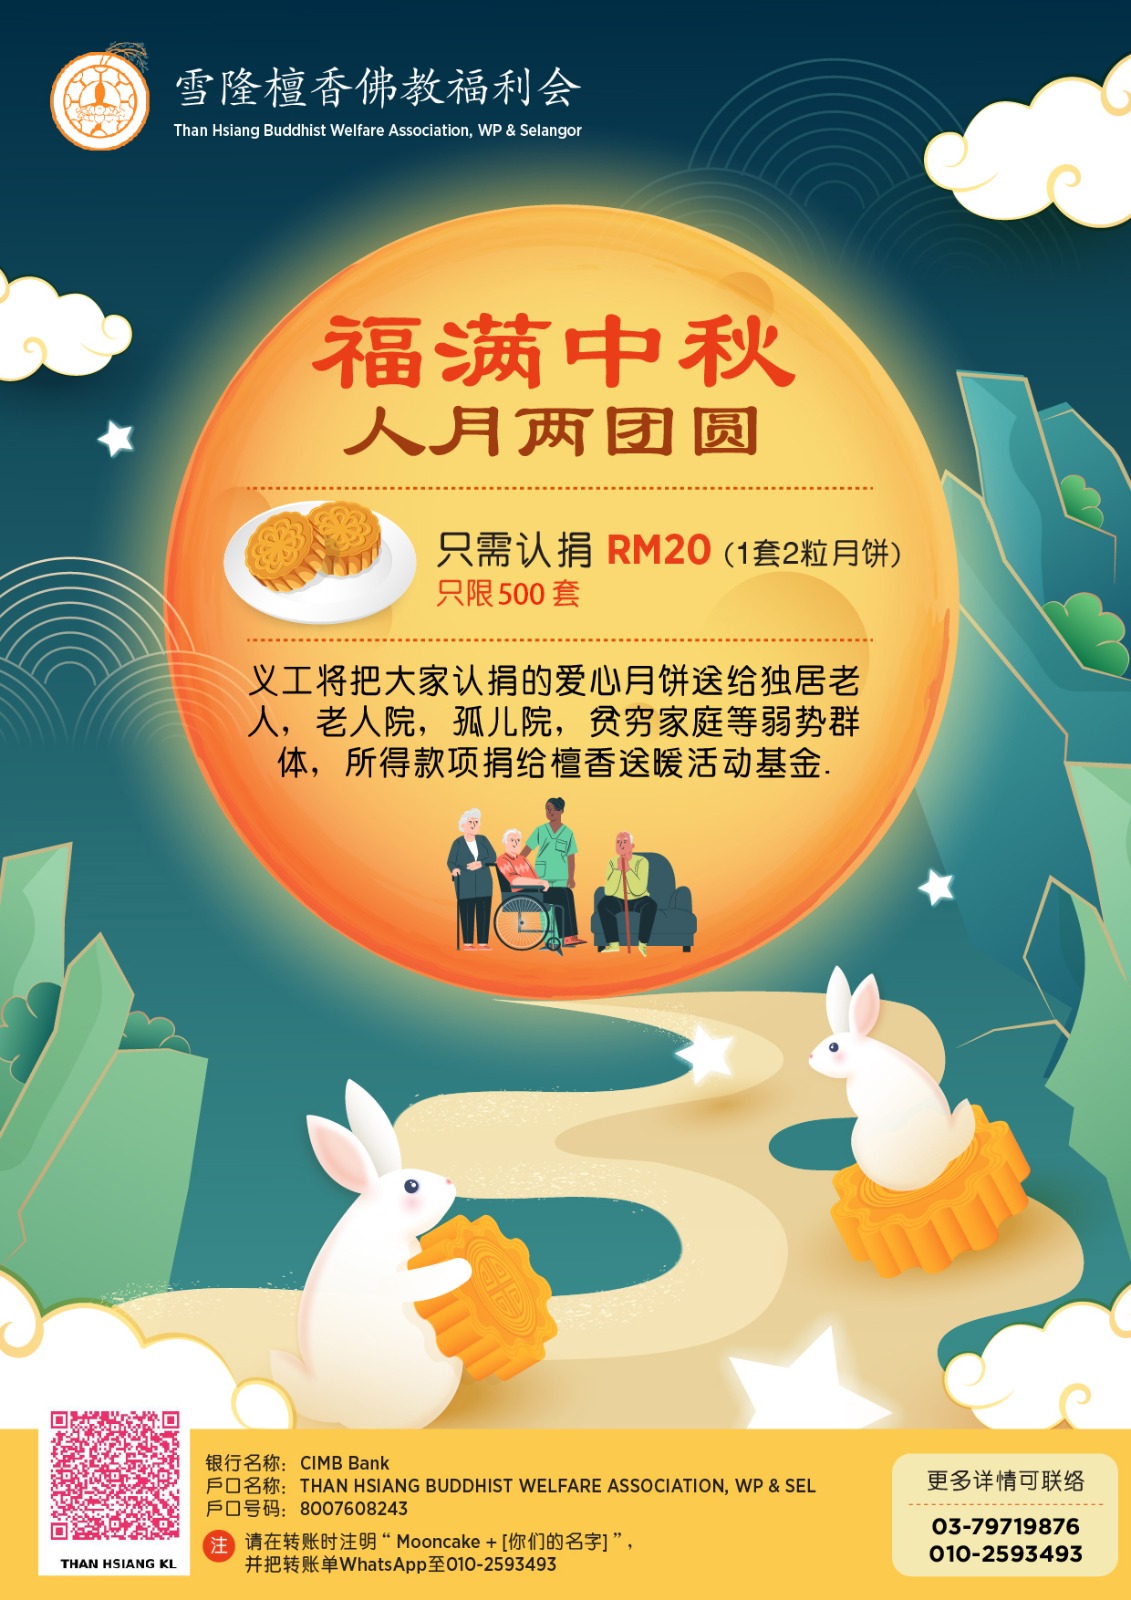 Celebrating Mid-Autumn Festival with the Underprivileged